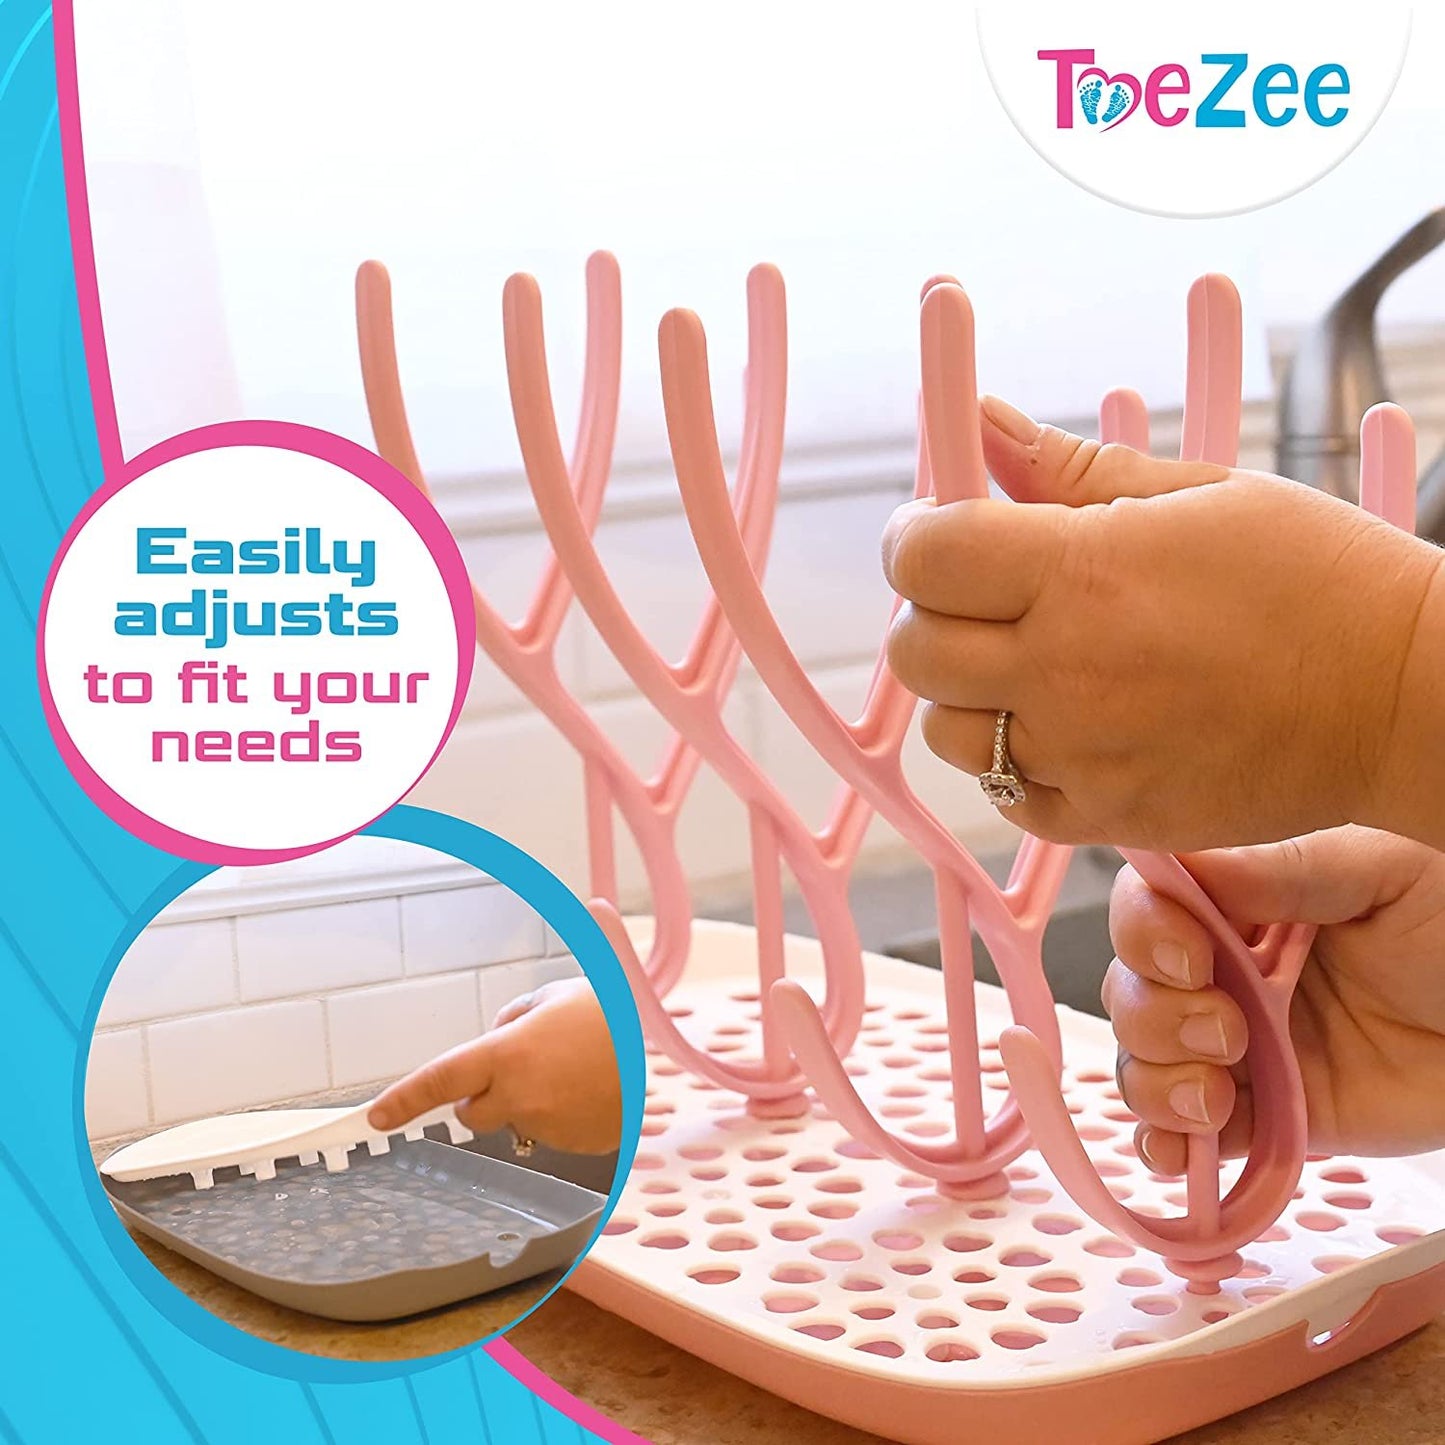 ToeZee Baby Bottle Drying Rack Space Saving Countertop Baby Bottle Holder, Drying Rack for Baby Bottles Accessories - Stores Up to 12 Bottles, Dishwasher Safe (Aqua)